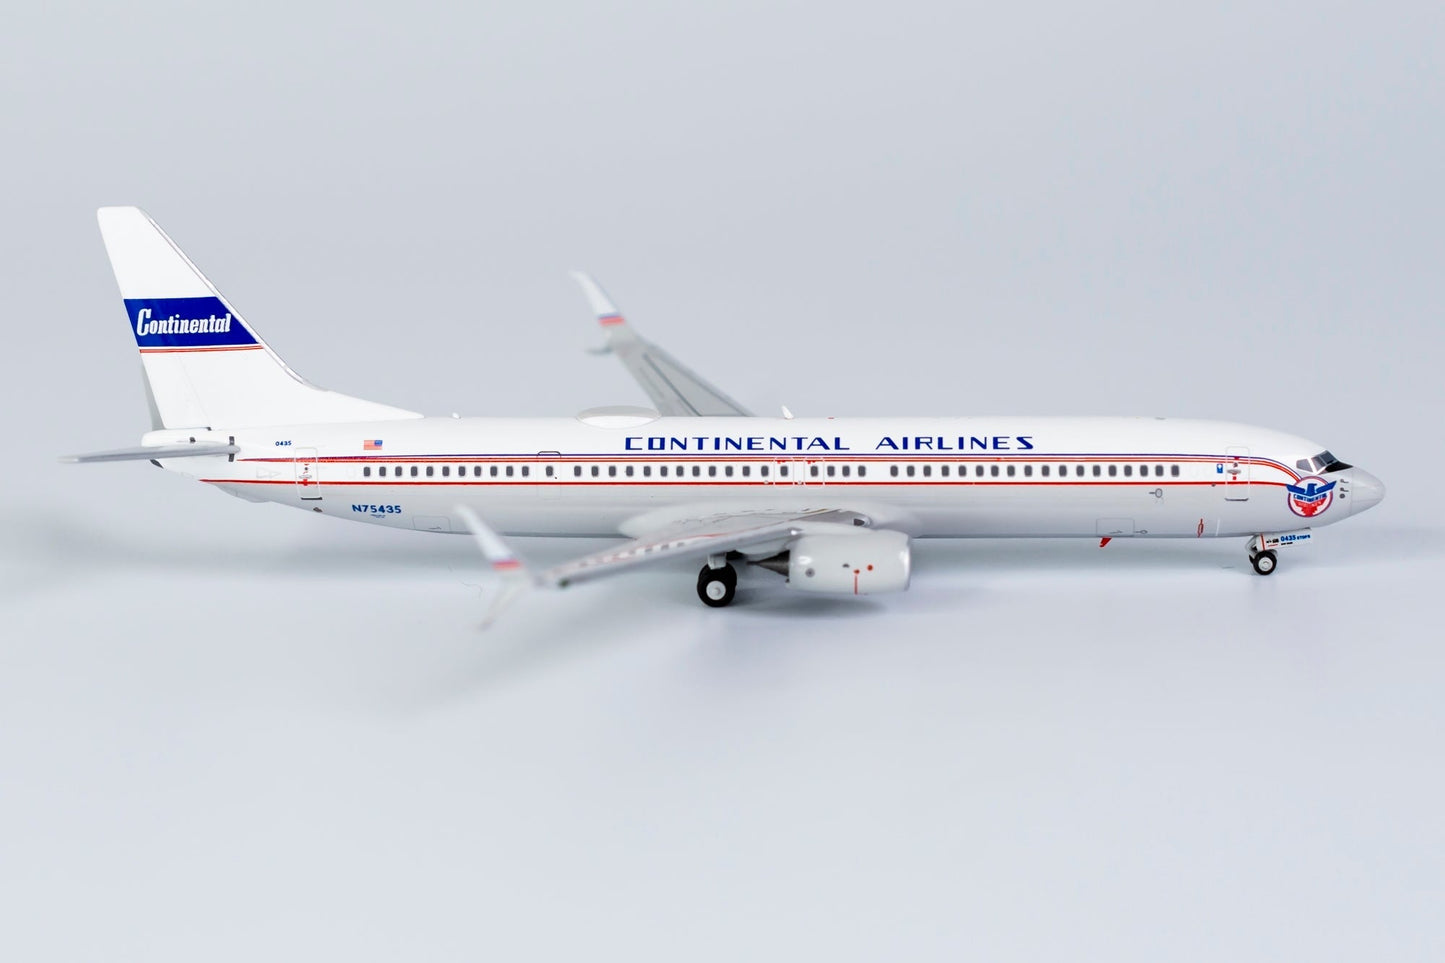 1/400 United Airlines B 737-900ER/w "Retro 75th Anniversary Livery" NG Models 79010 *Has paint chip by its horizontal stabilizer*